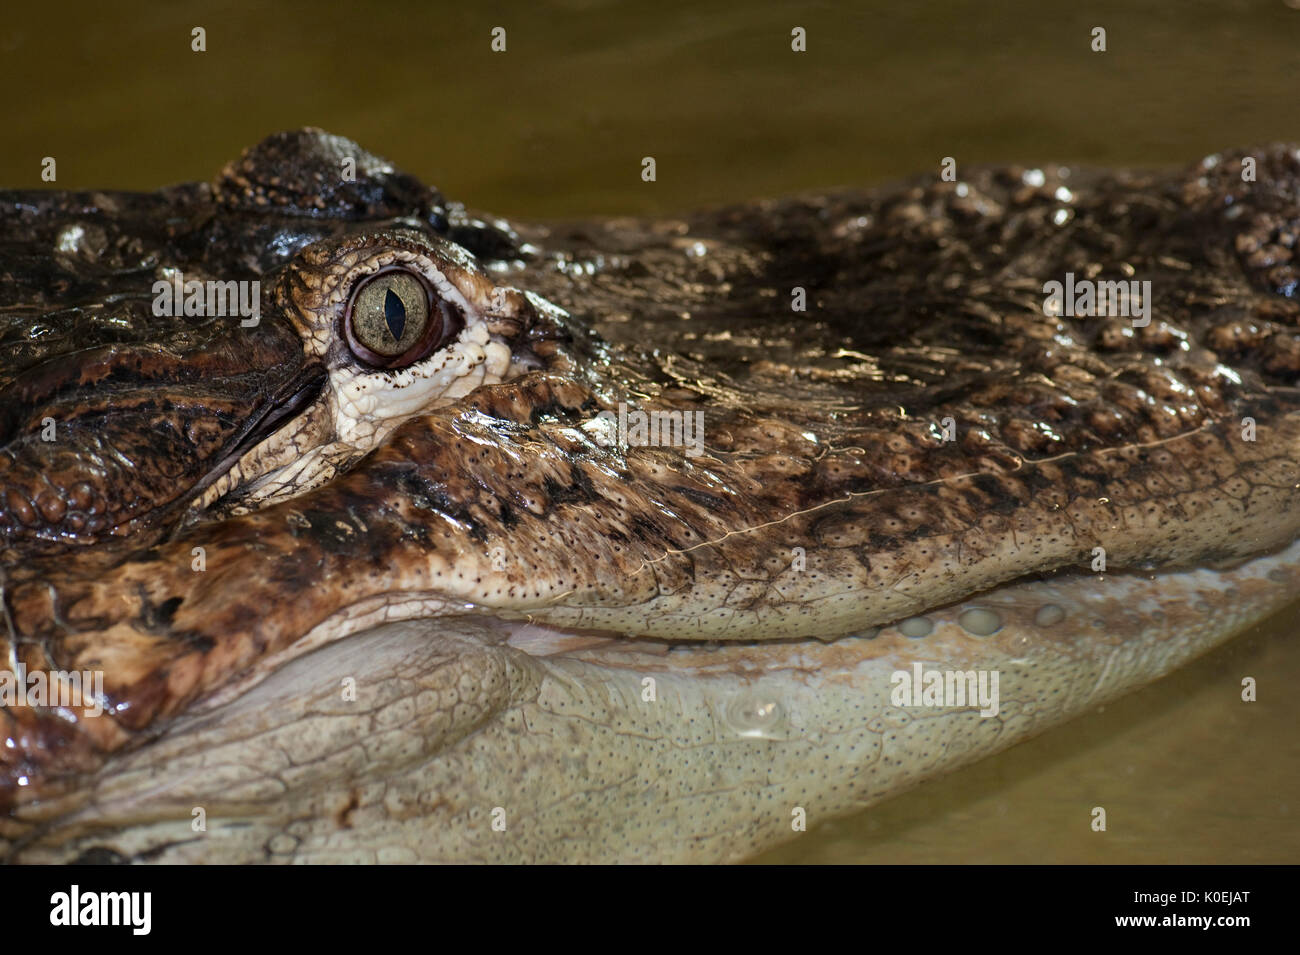 American Alligator, Alligator mississippiensis, Captive, close up showing eyes Stock Photo